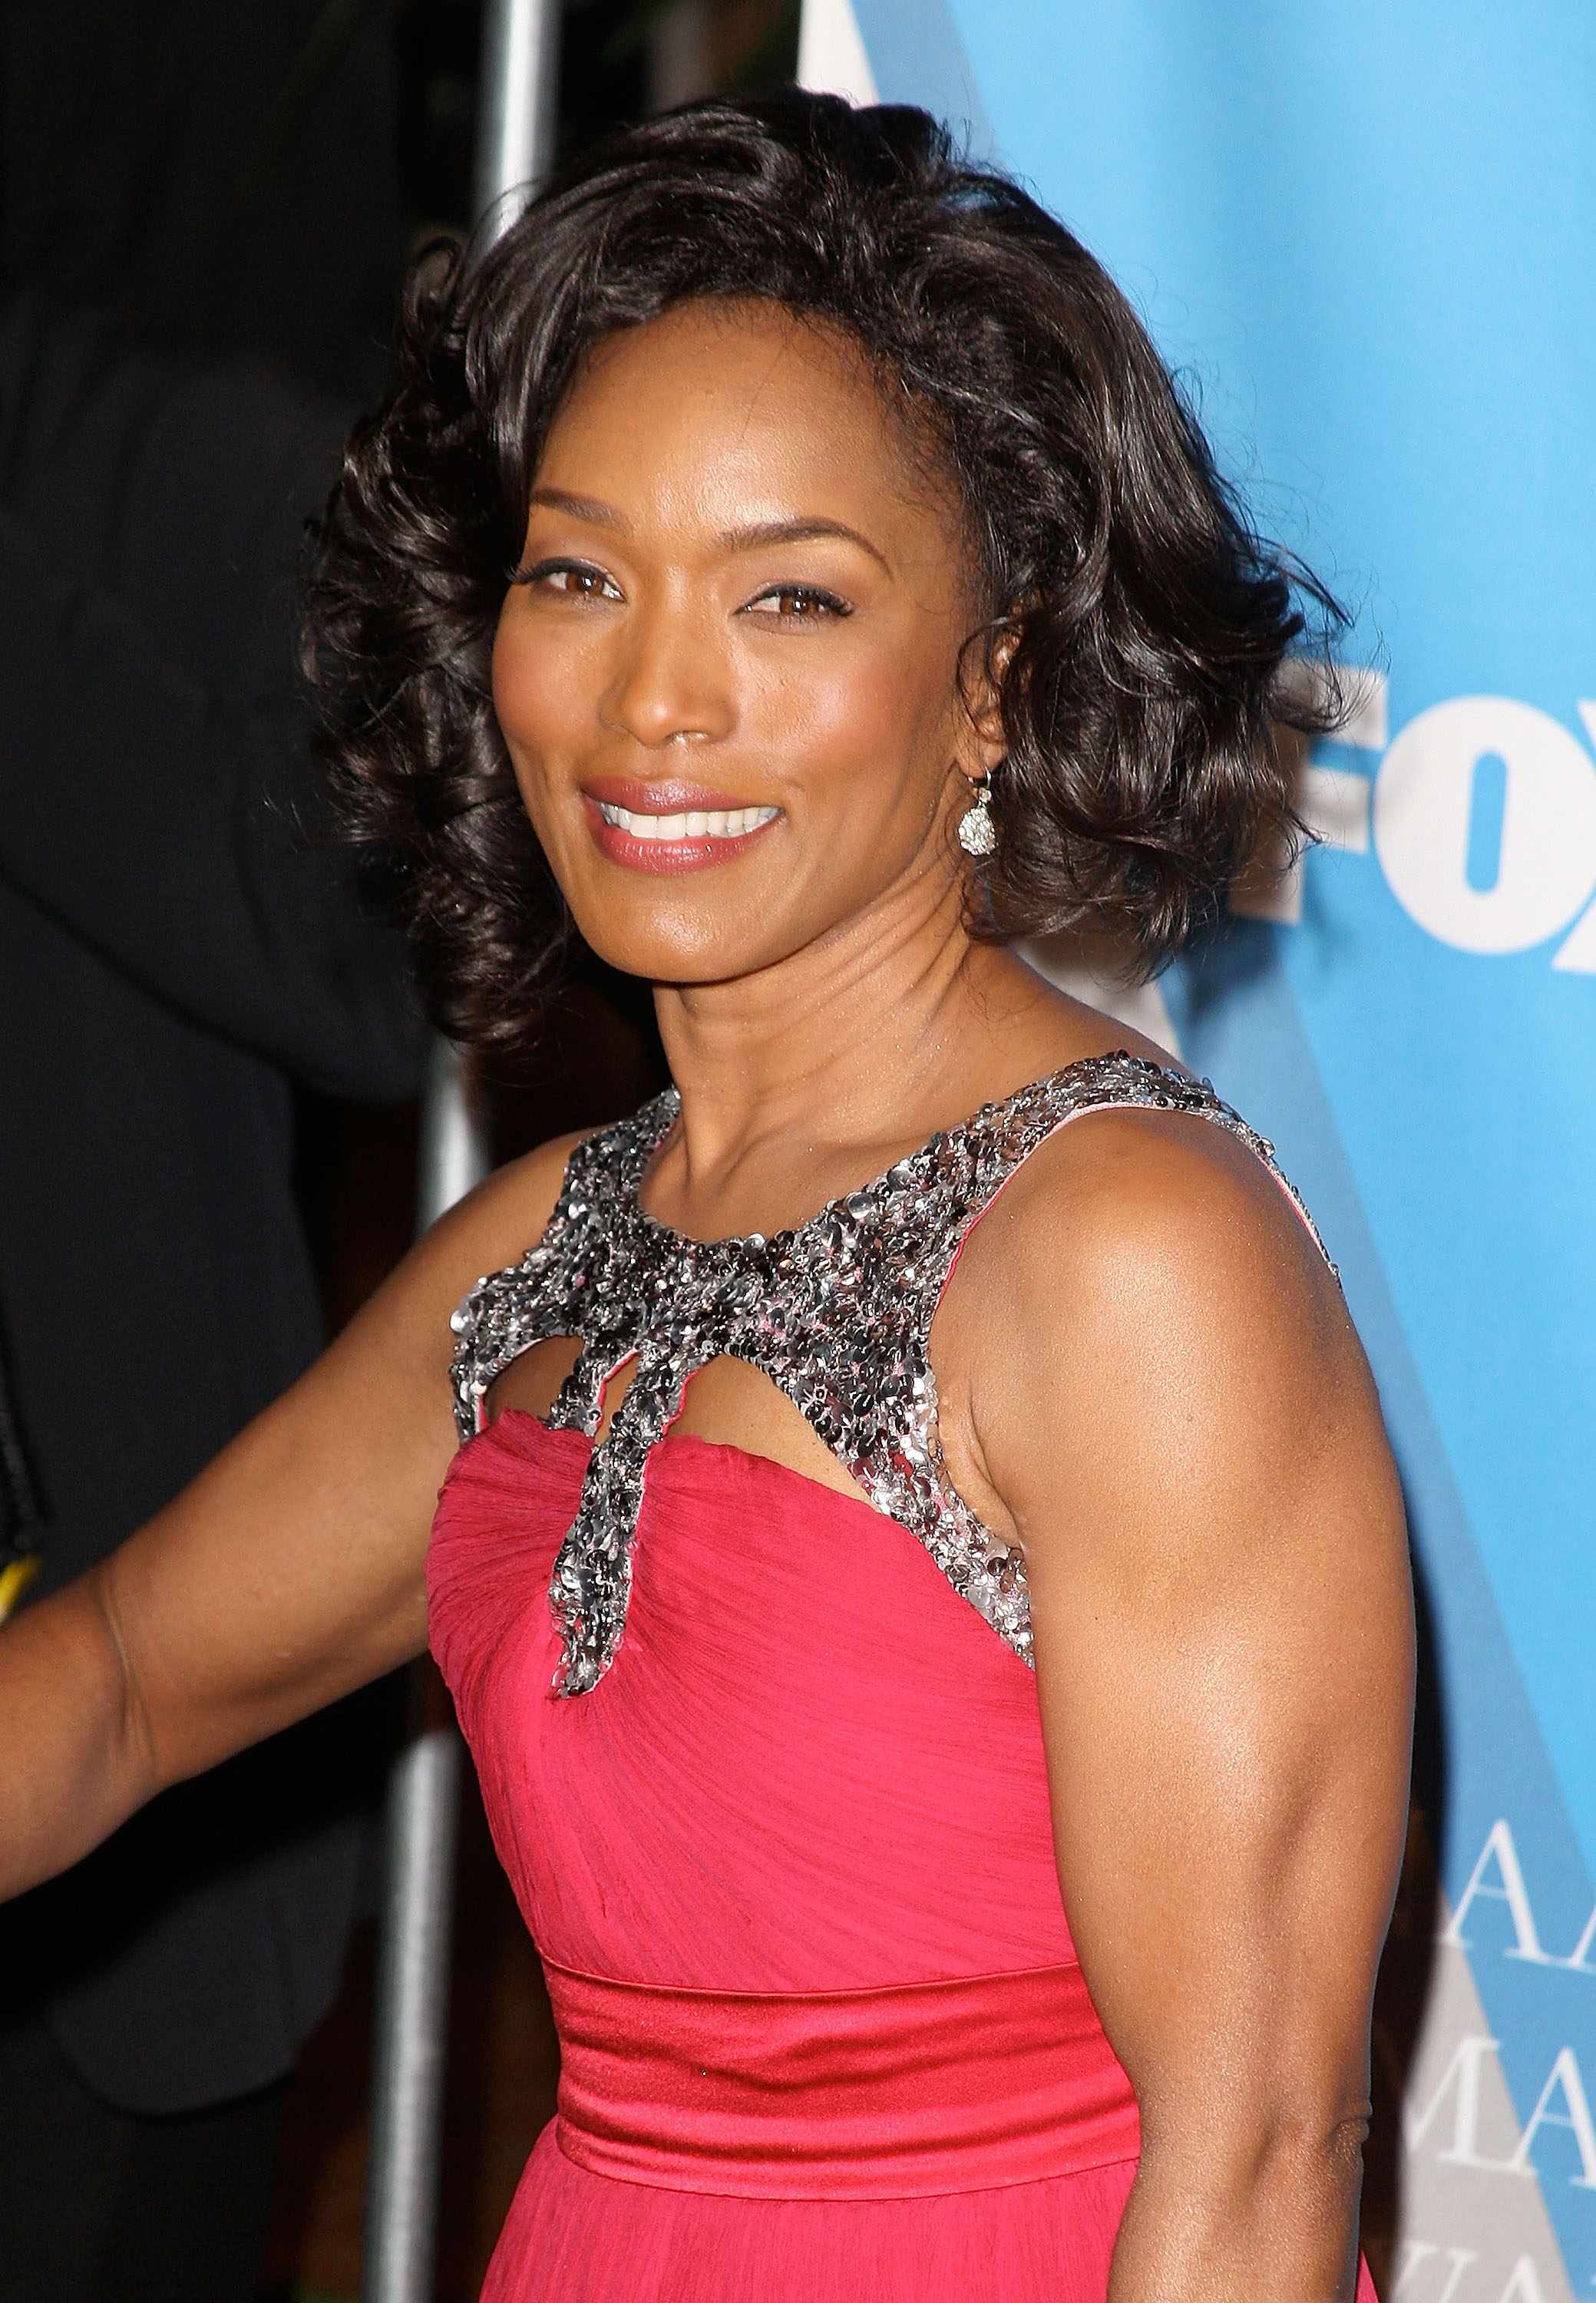 Angela Bassett in a sleeveless red gown with sparkling embellishments at a formal event